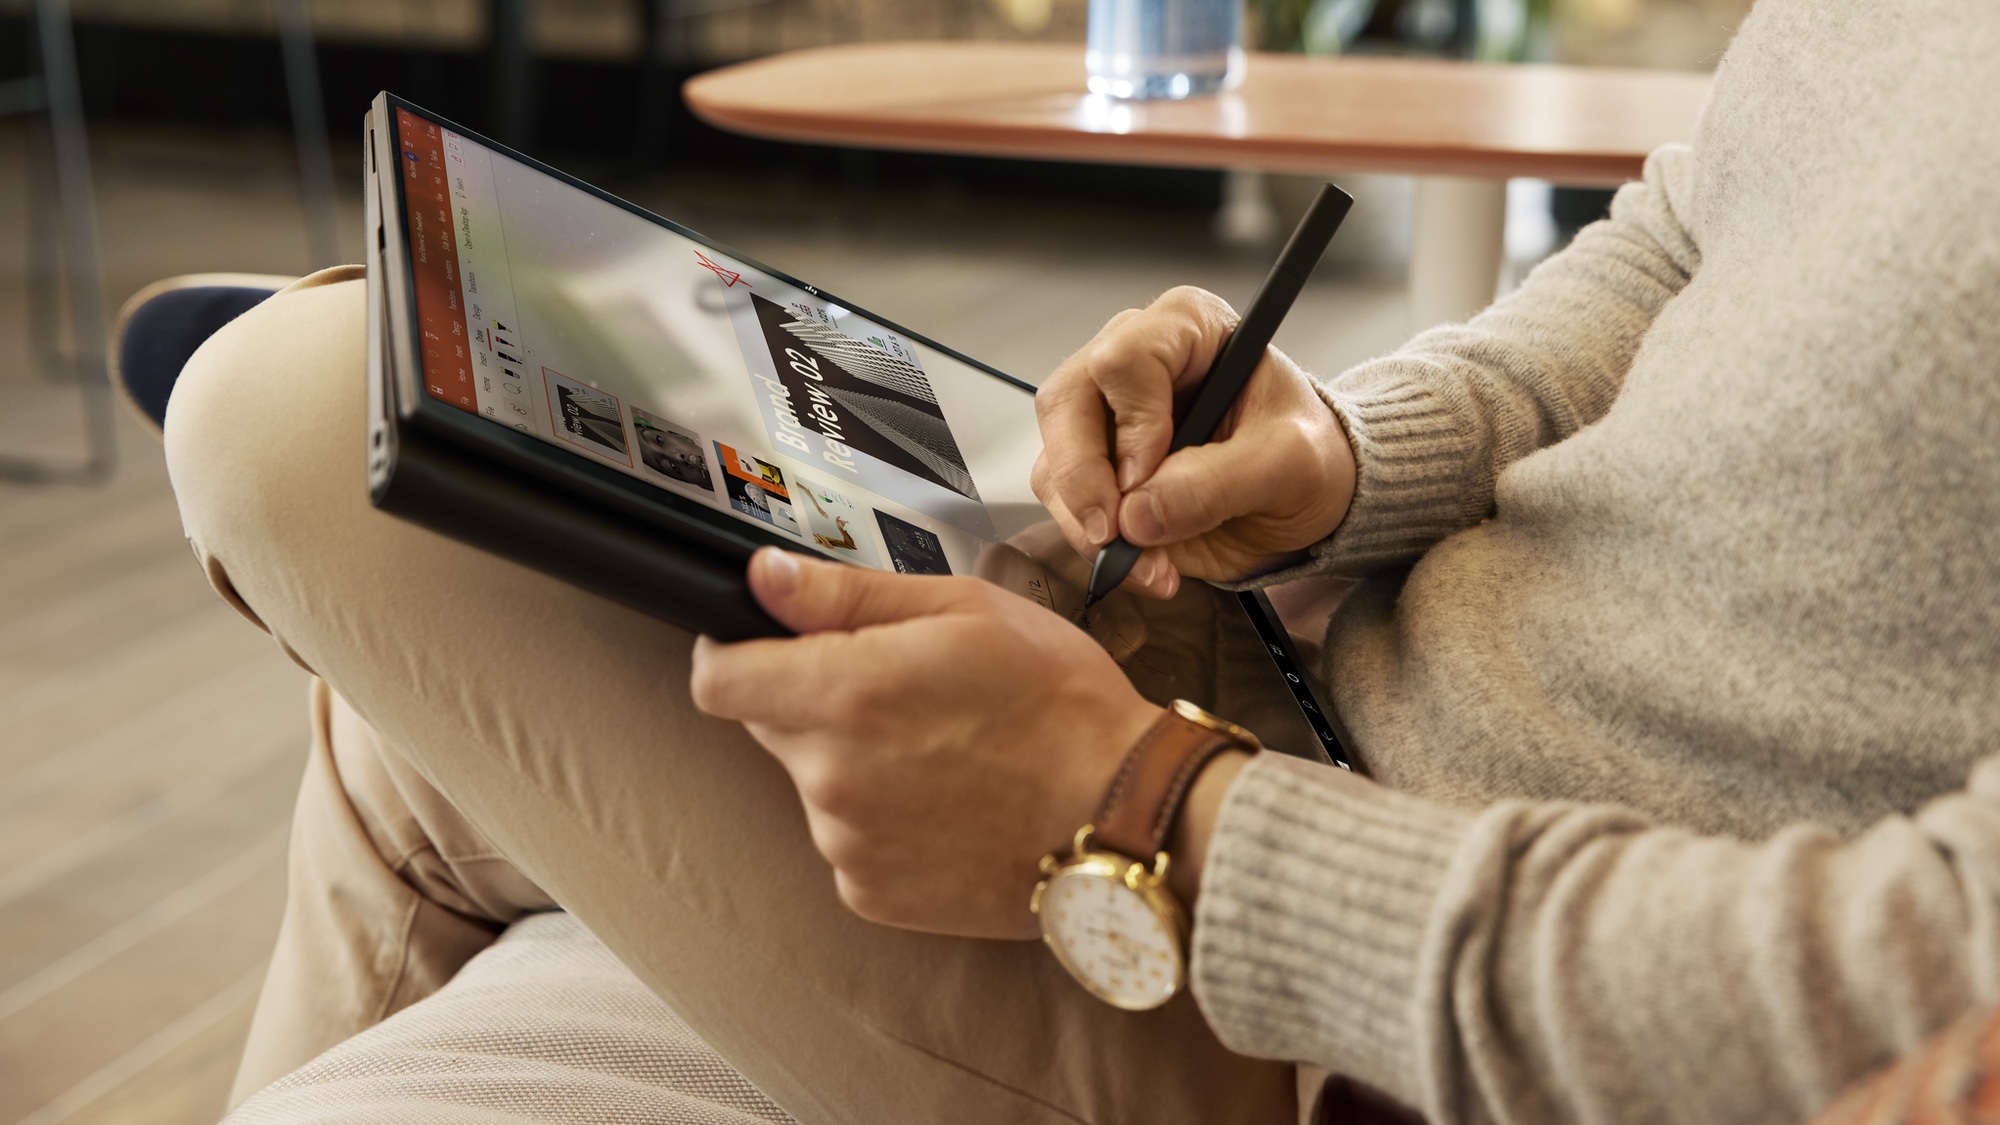 HP Elite Folio brings 5G to 2-in-1 Surface Pro rival | Tom's Guide